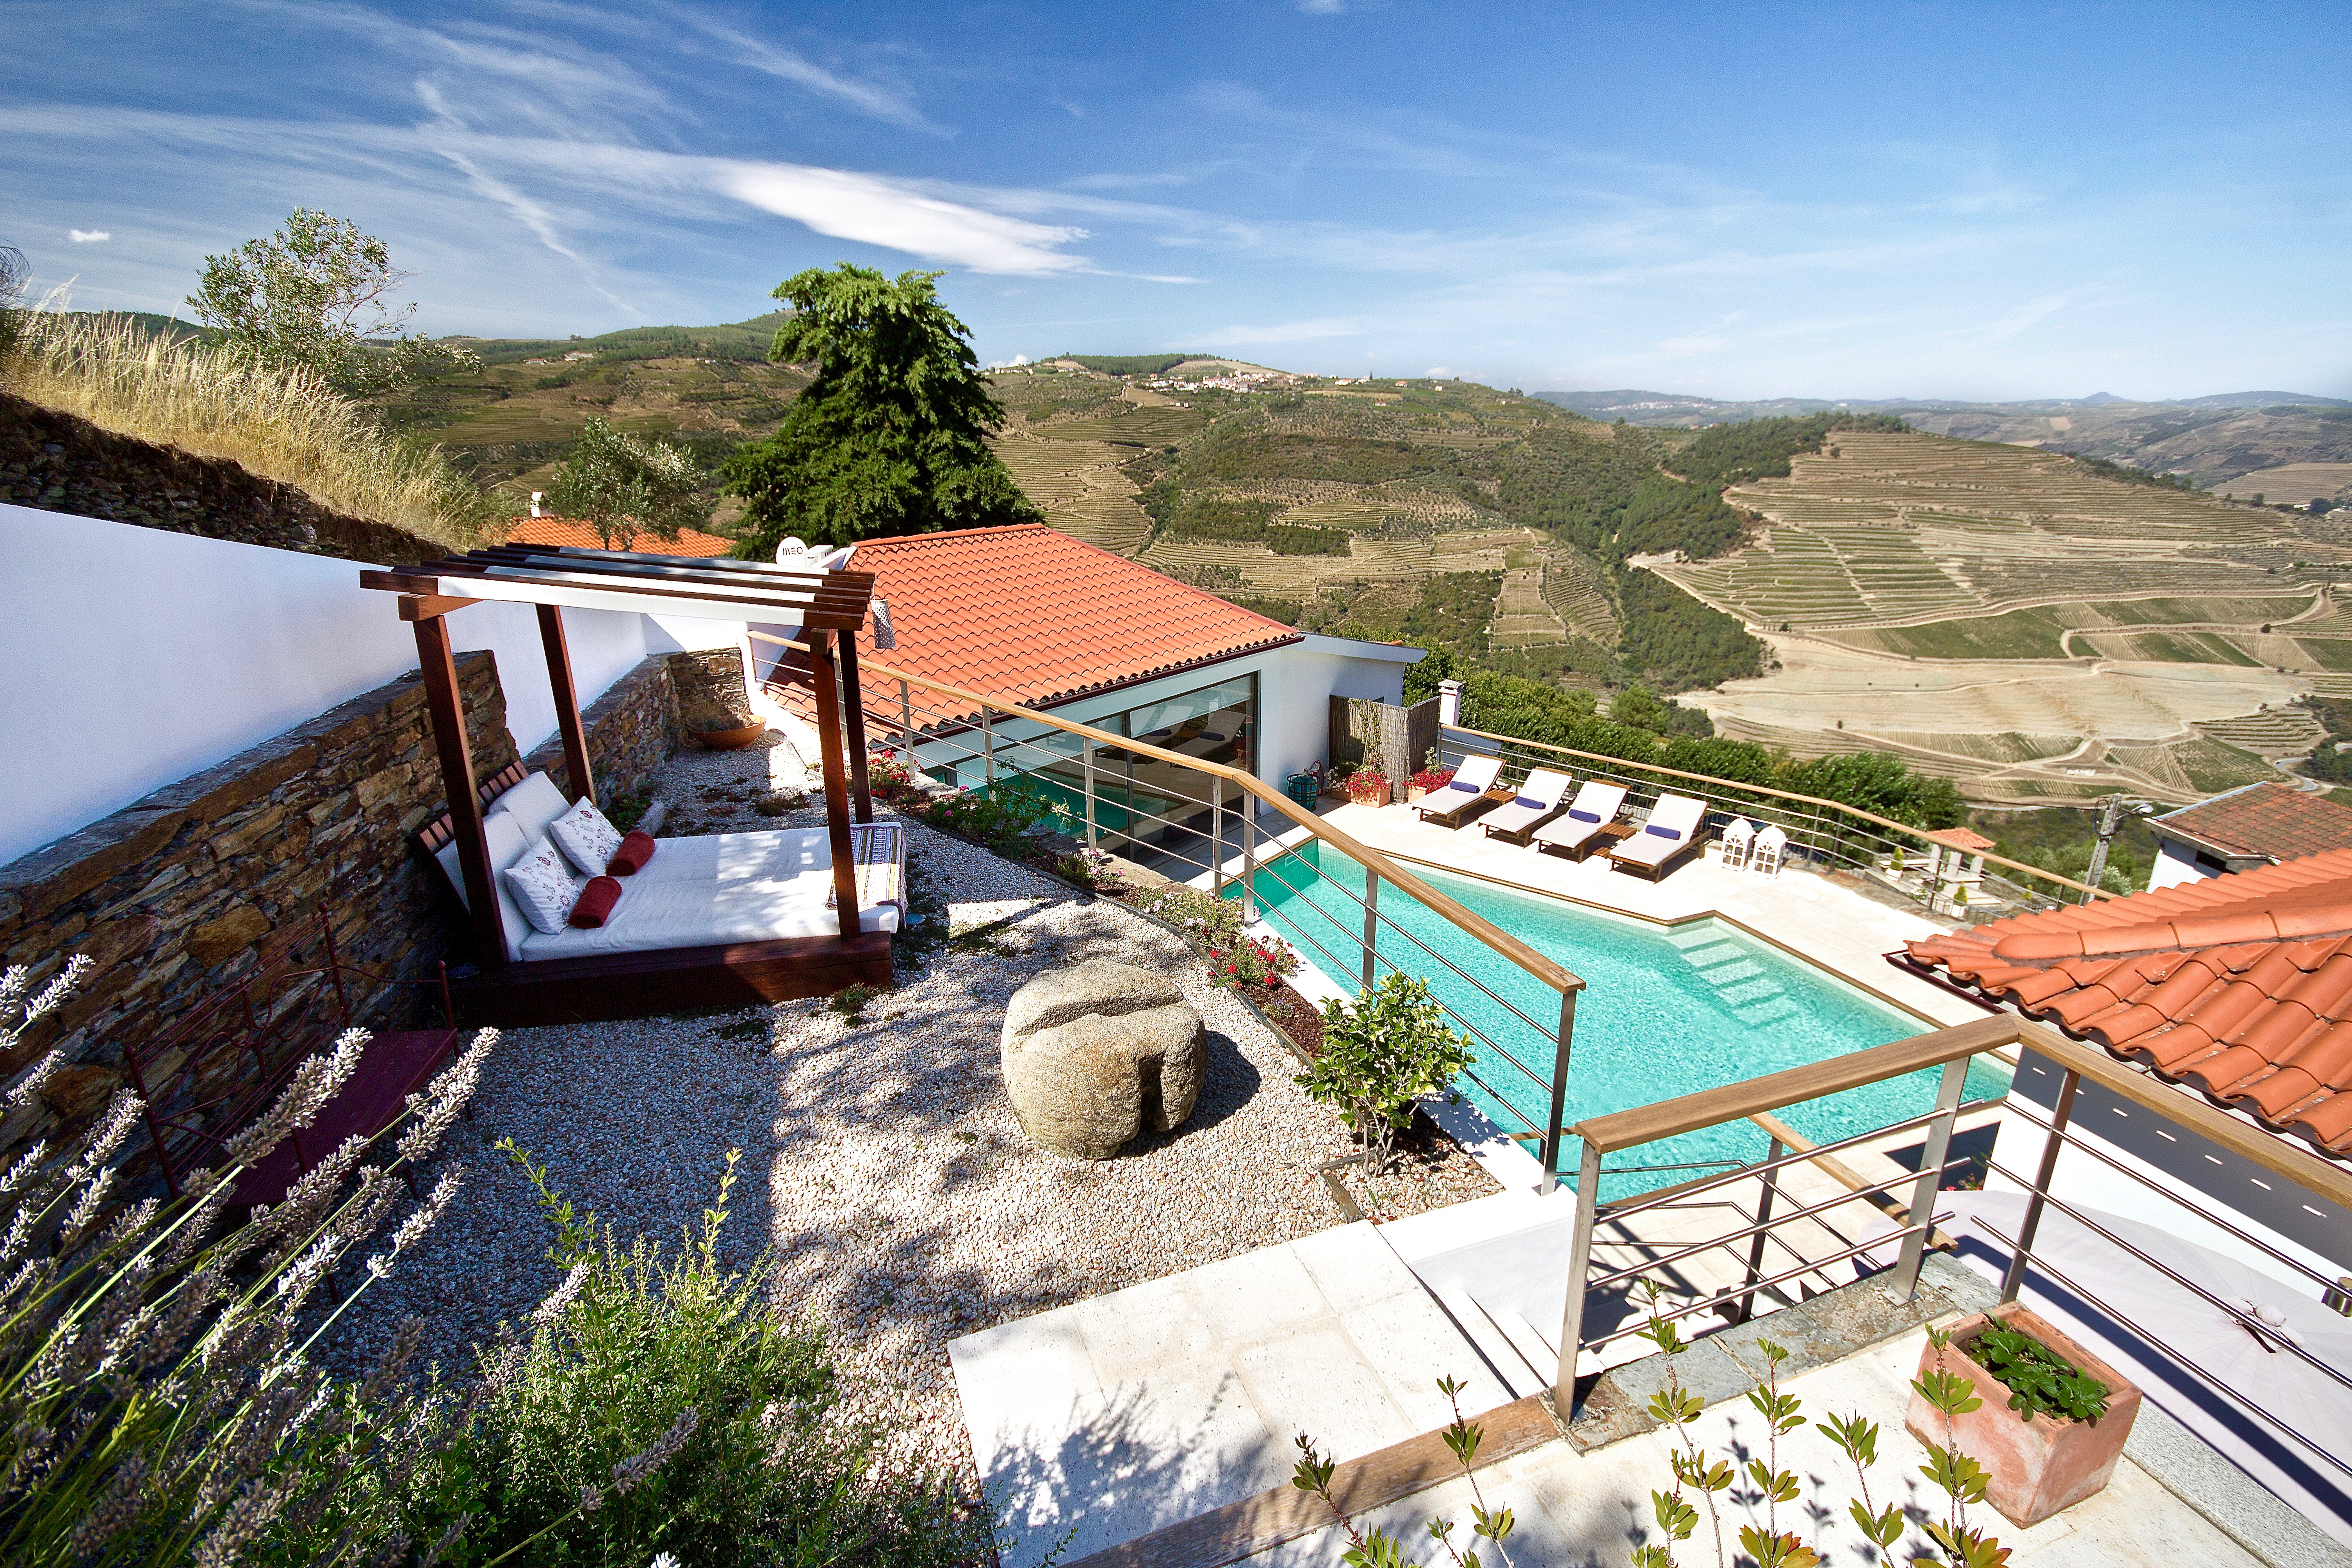 Property Image 1 - 3 Bedroom Luxury Villa With pool and Douro Valley Scenery Views